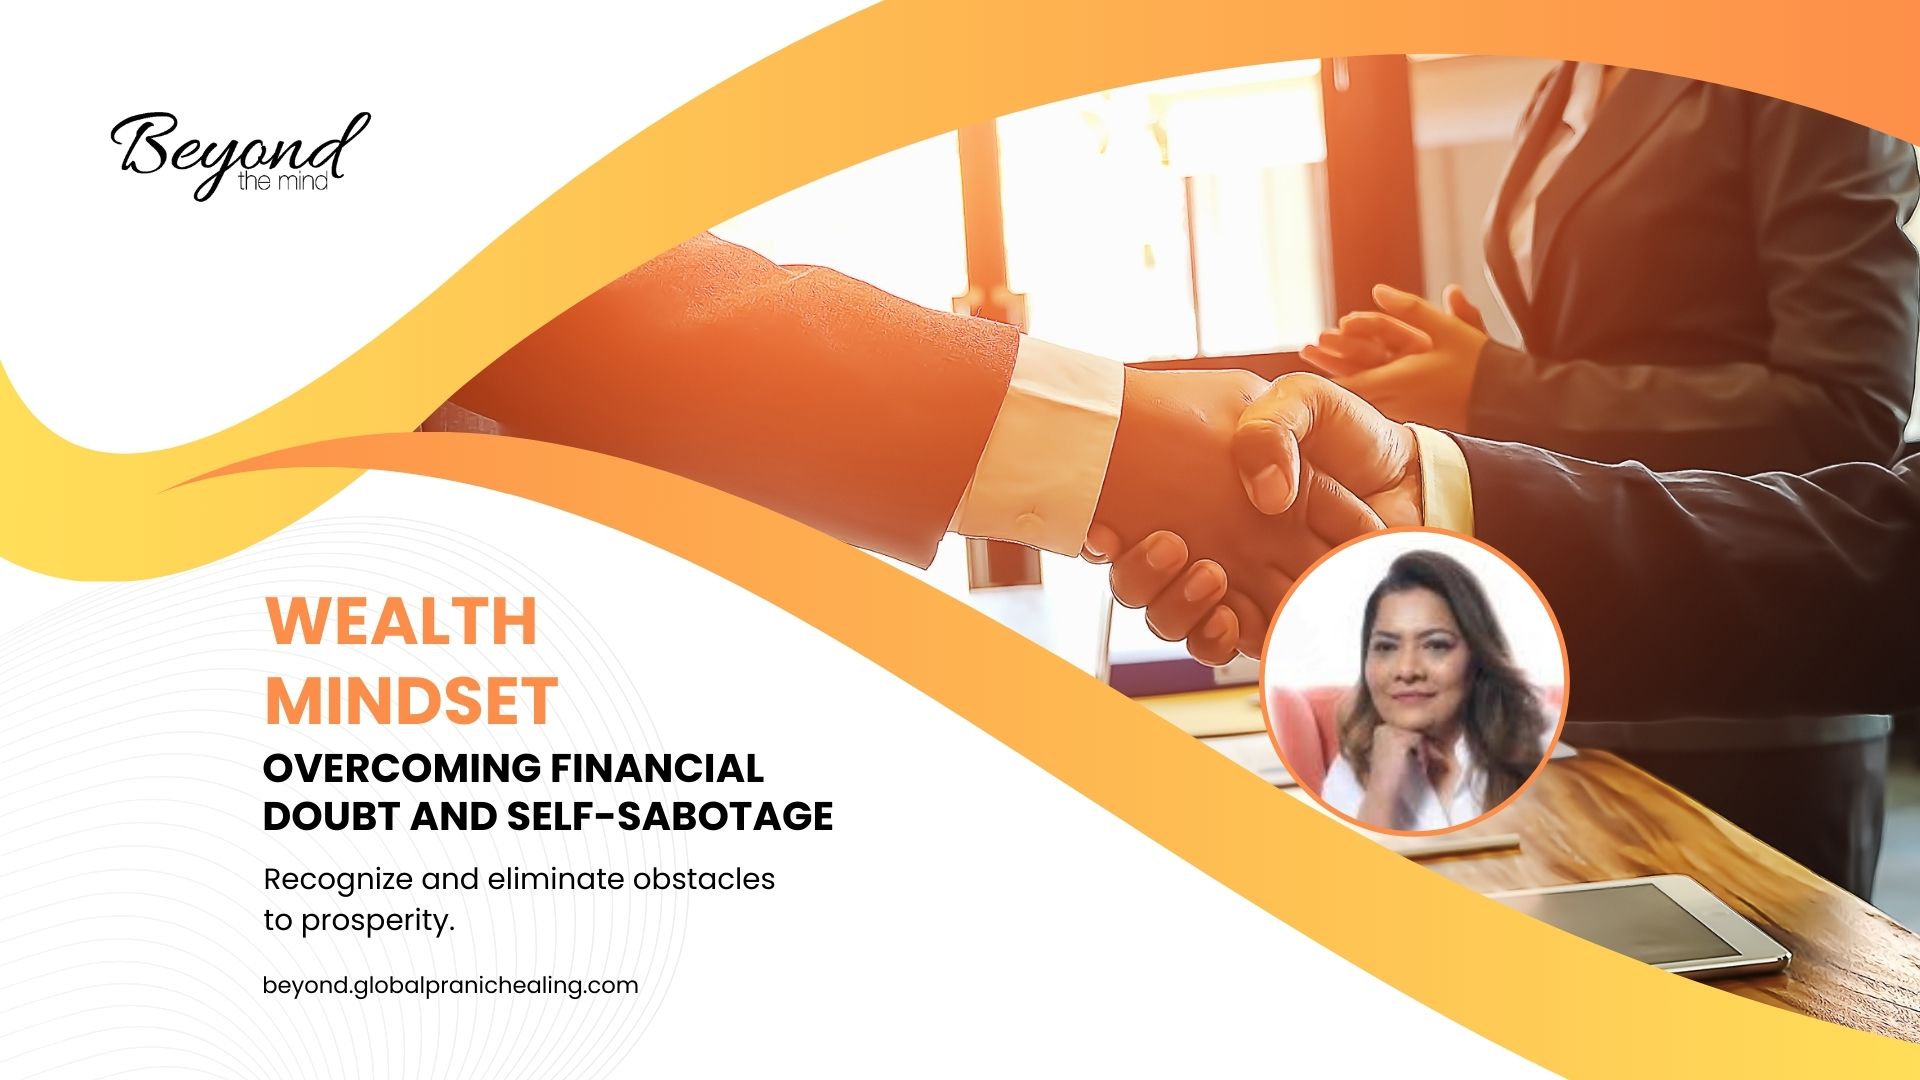 Wealth Mindset: Overcoming Financial Doubt and Self-Sabotage